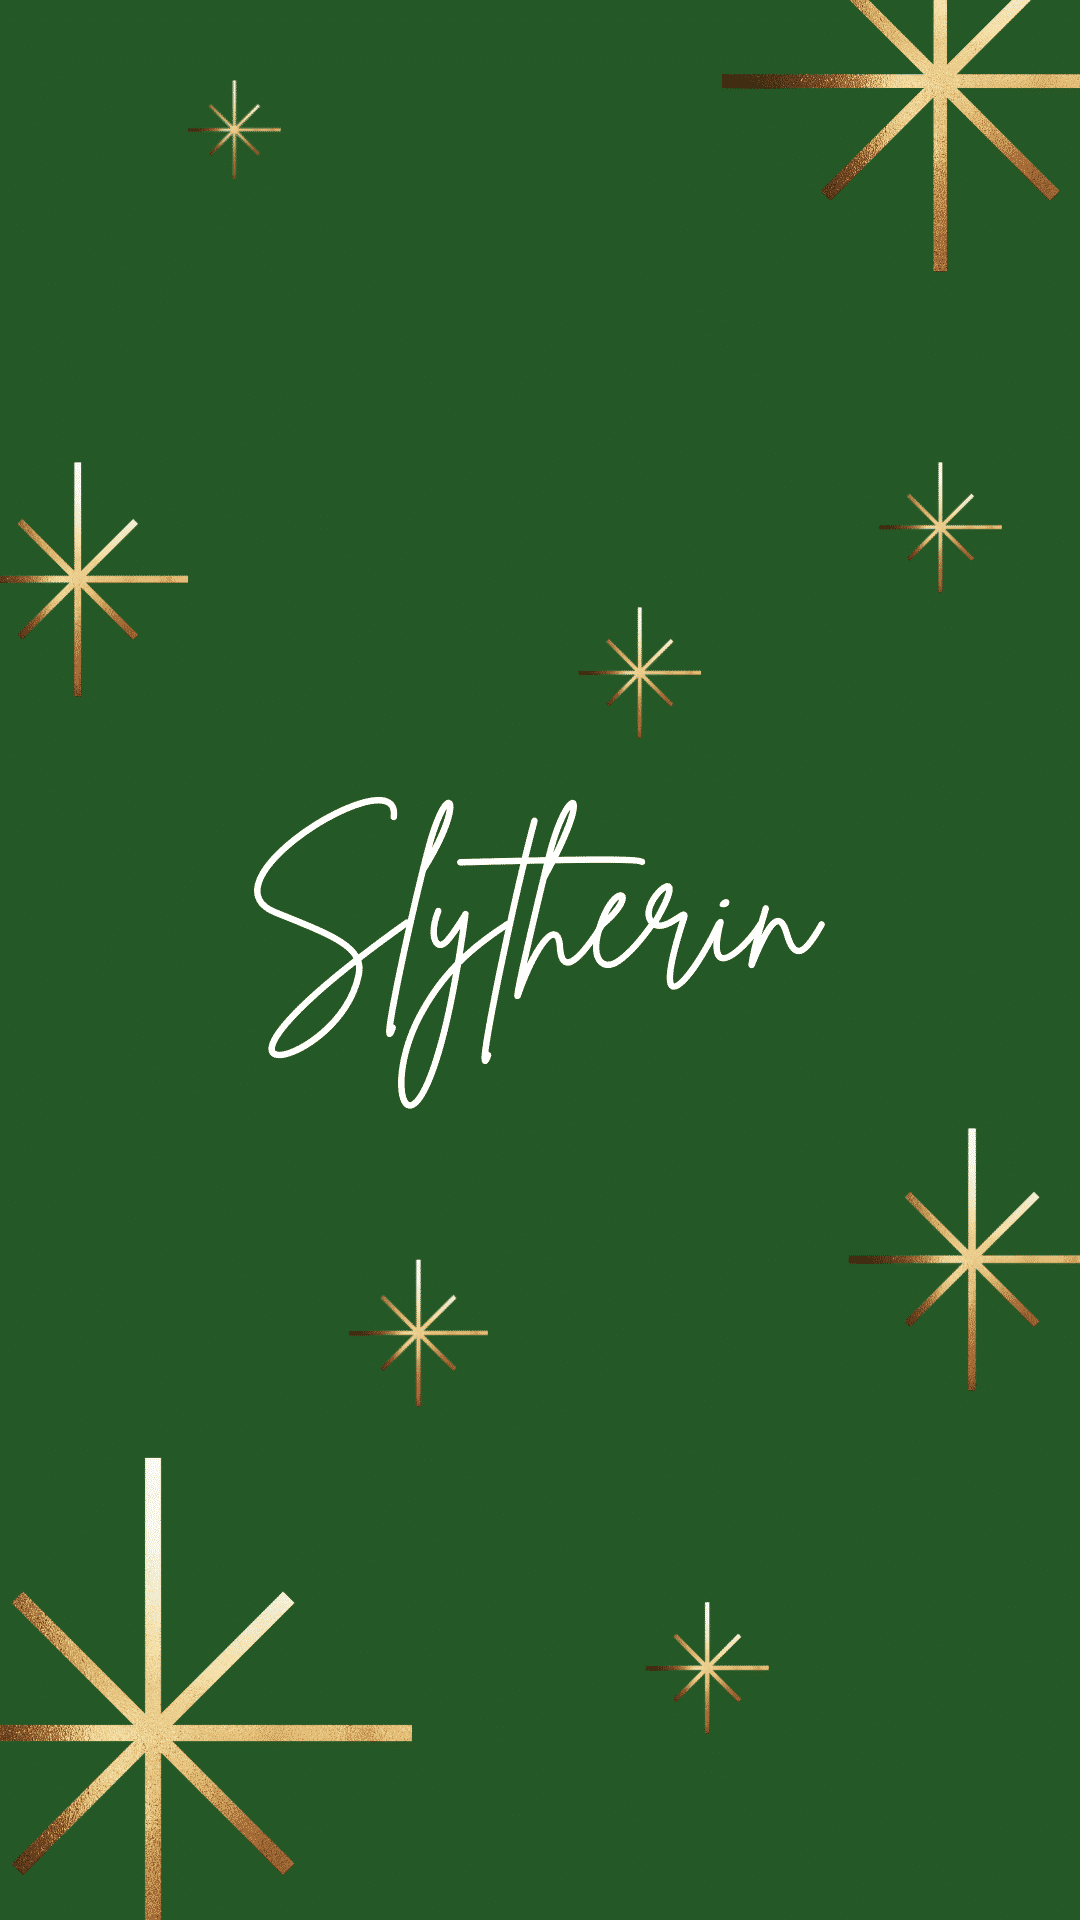 The cover of a book with gold stars and green background - Slytherin